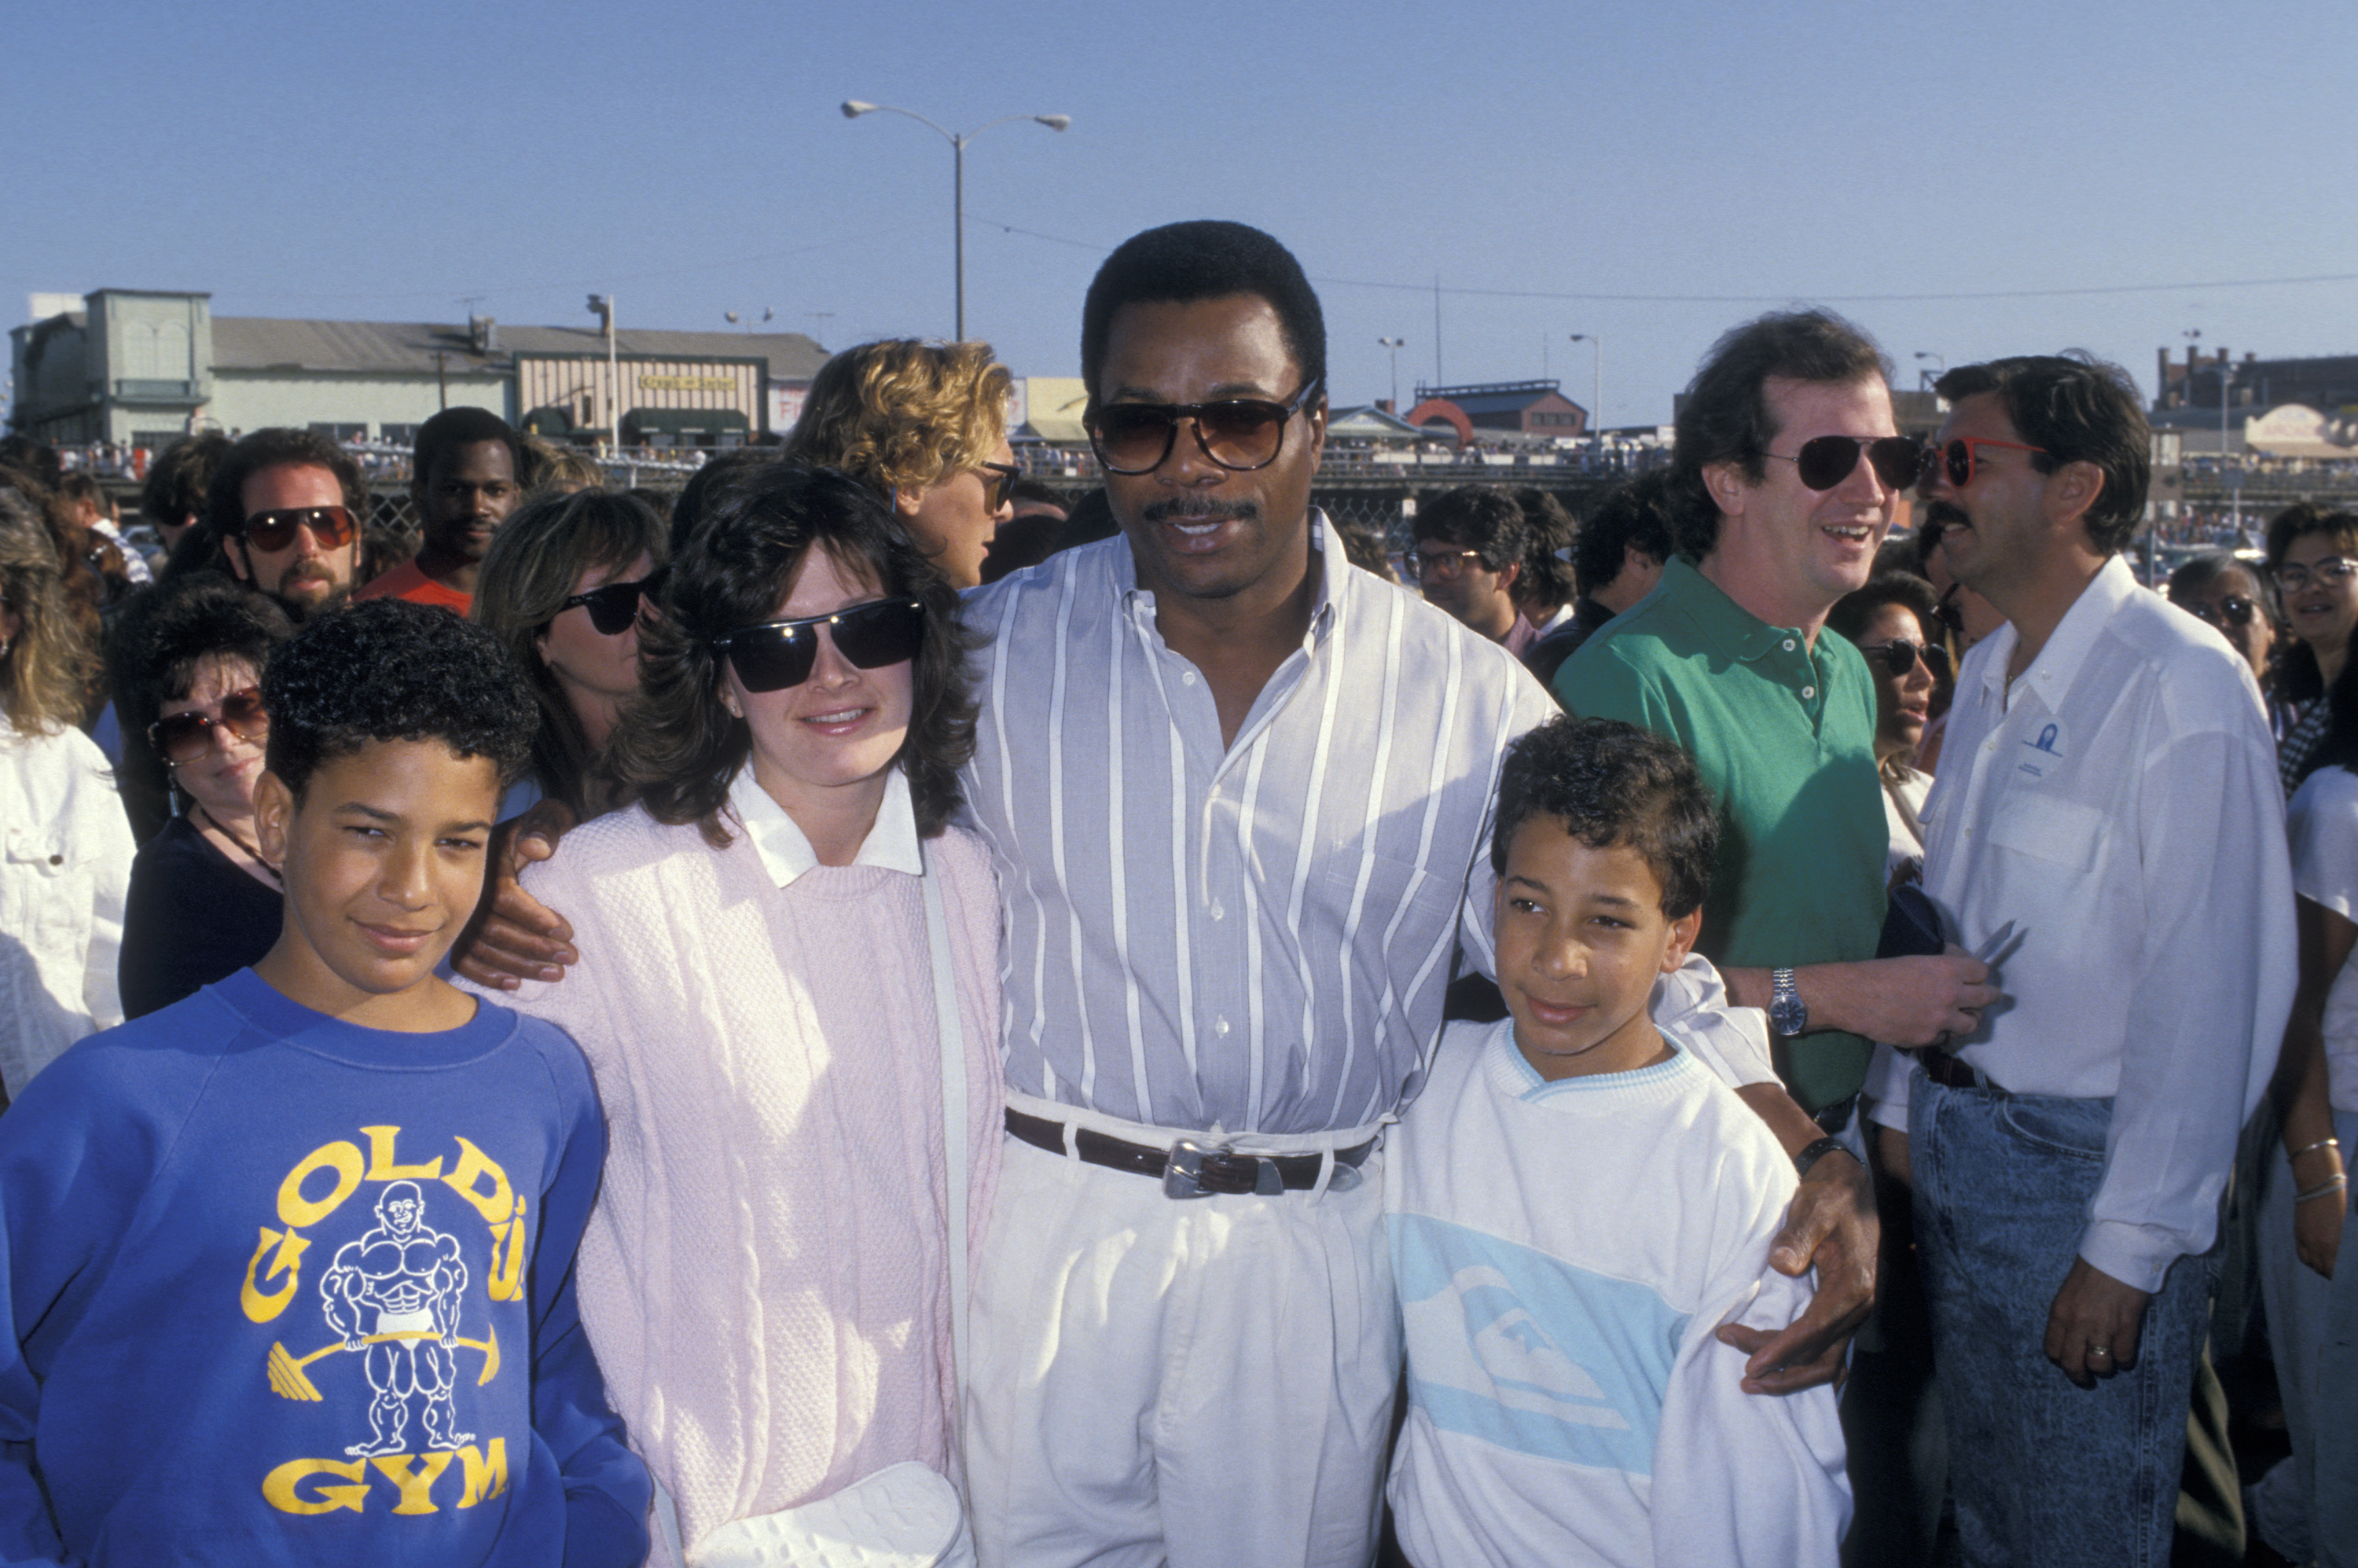 Carl Weathers, wife and sons attending Cirque du Soleil performance on March 27, 1988 in Santa Monica, California | Source:  Getty Images